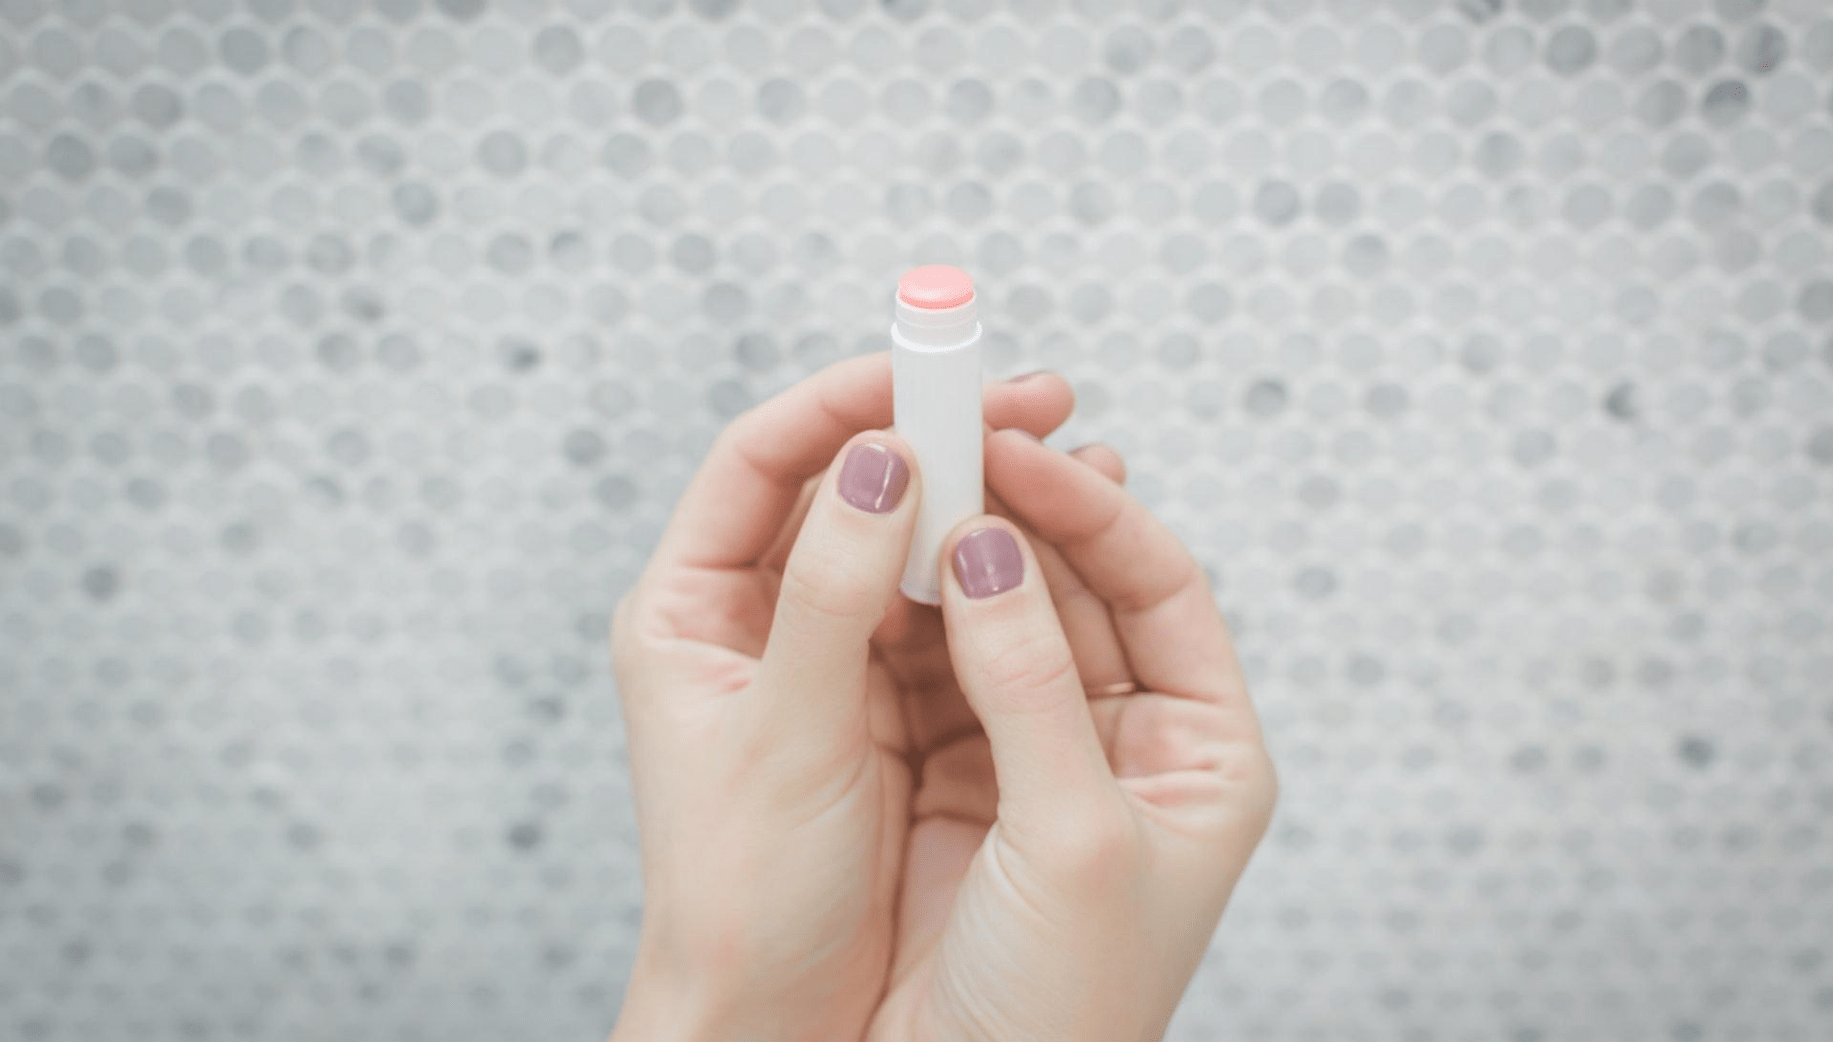 Honey can be used as a natural lip balm